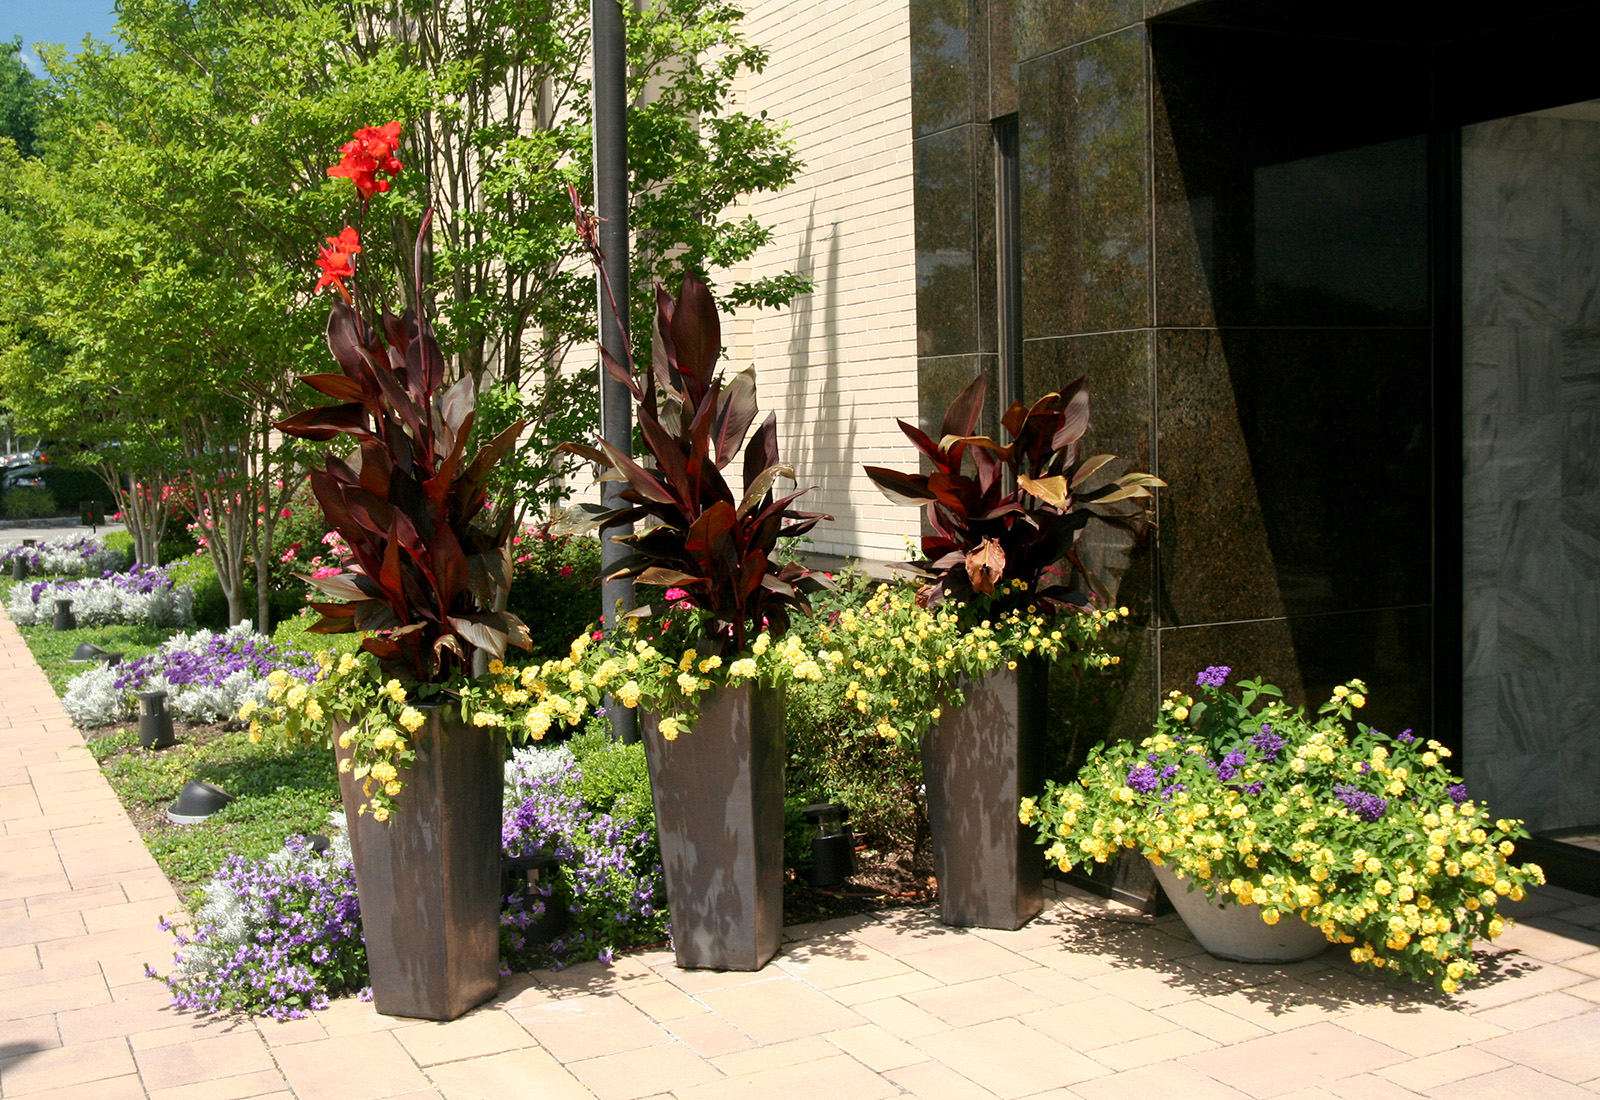 Modern mixed planters for summer color in a commercial setting.